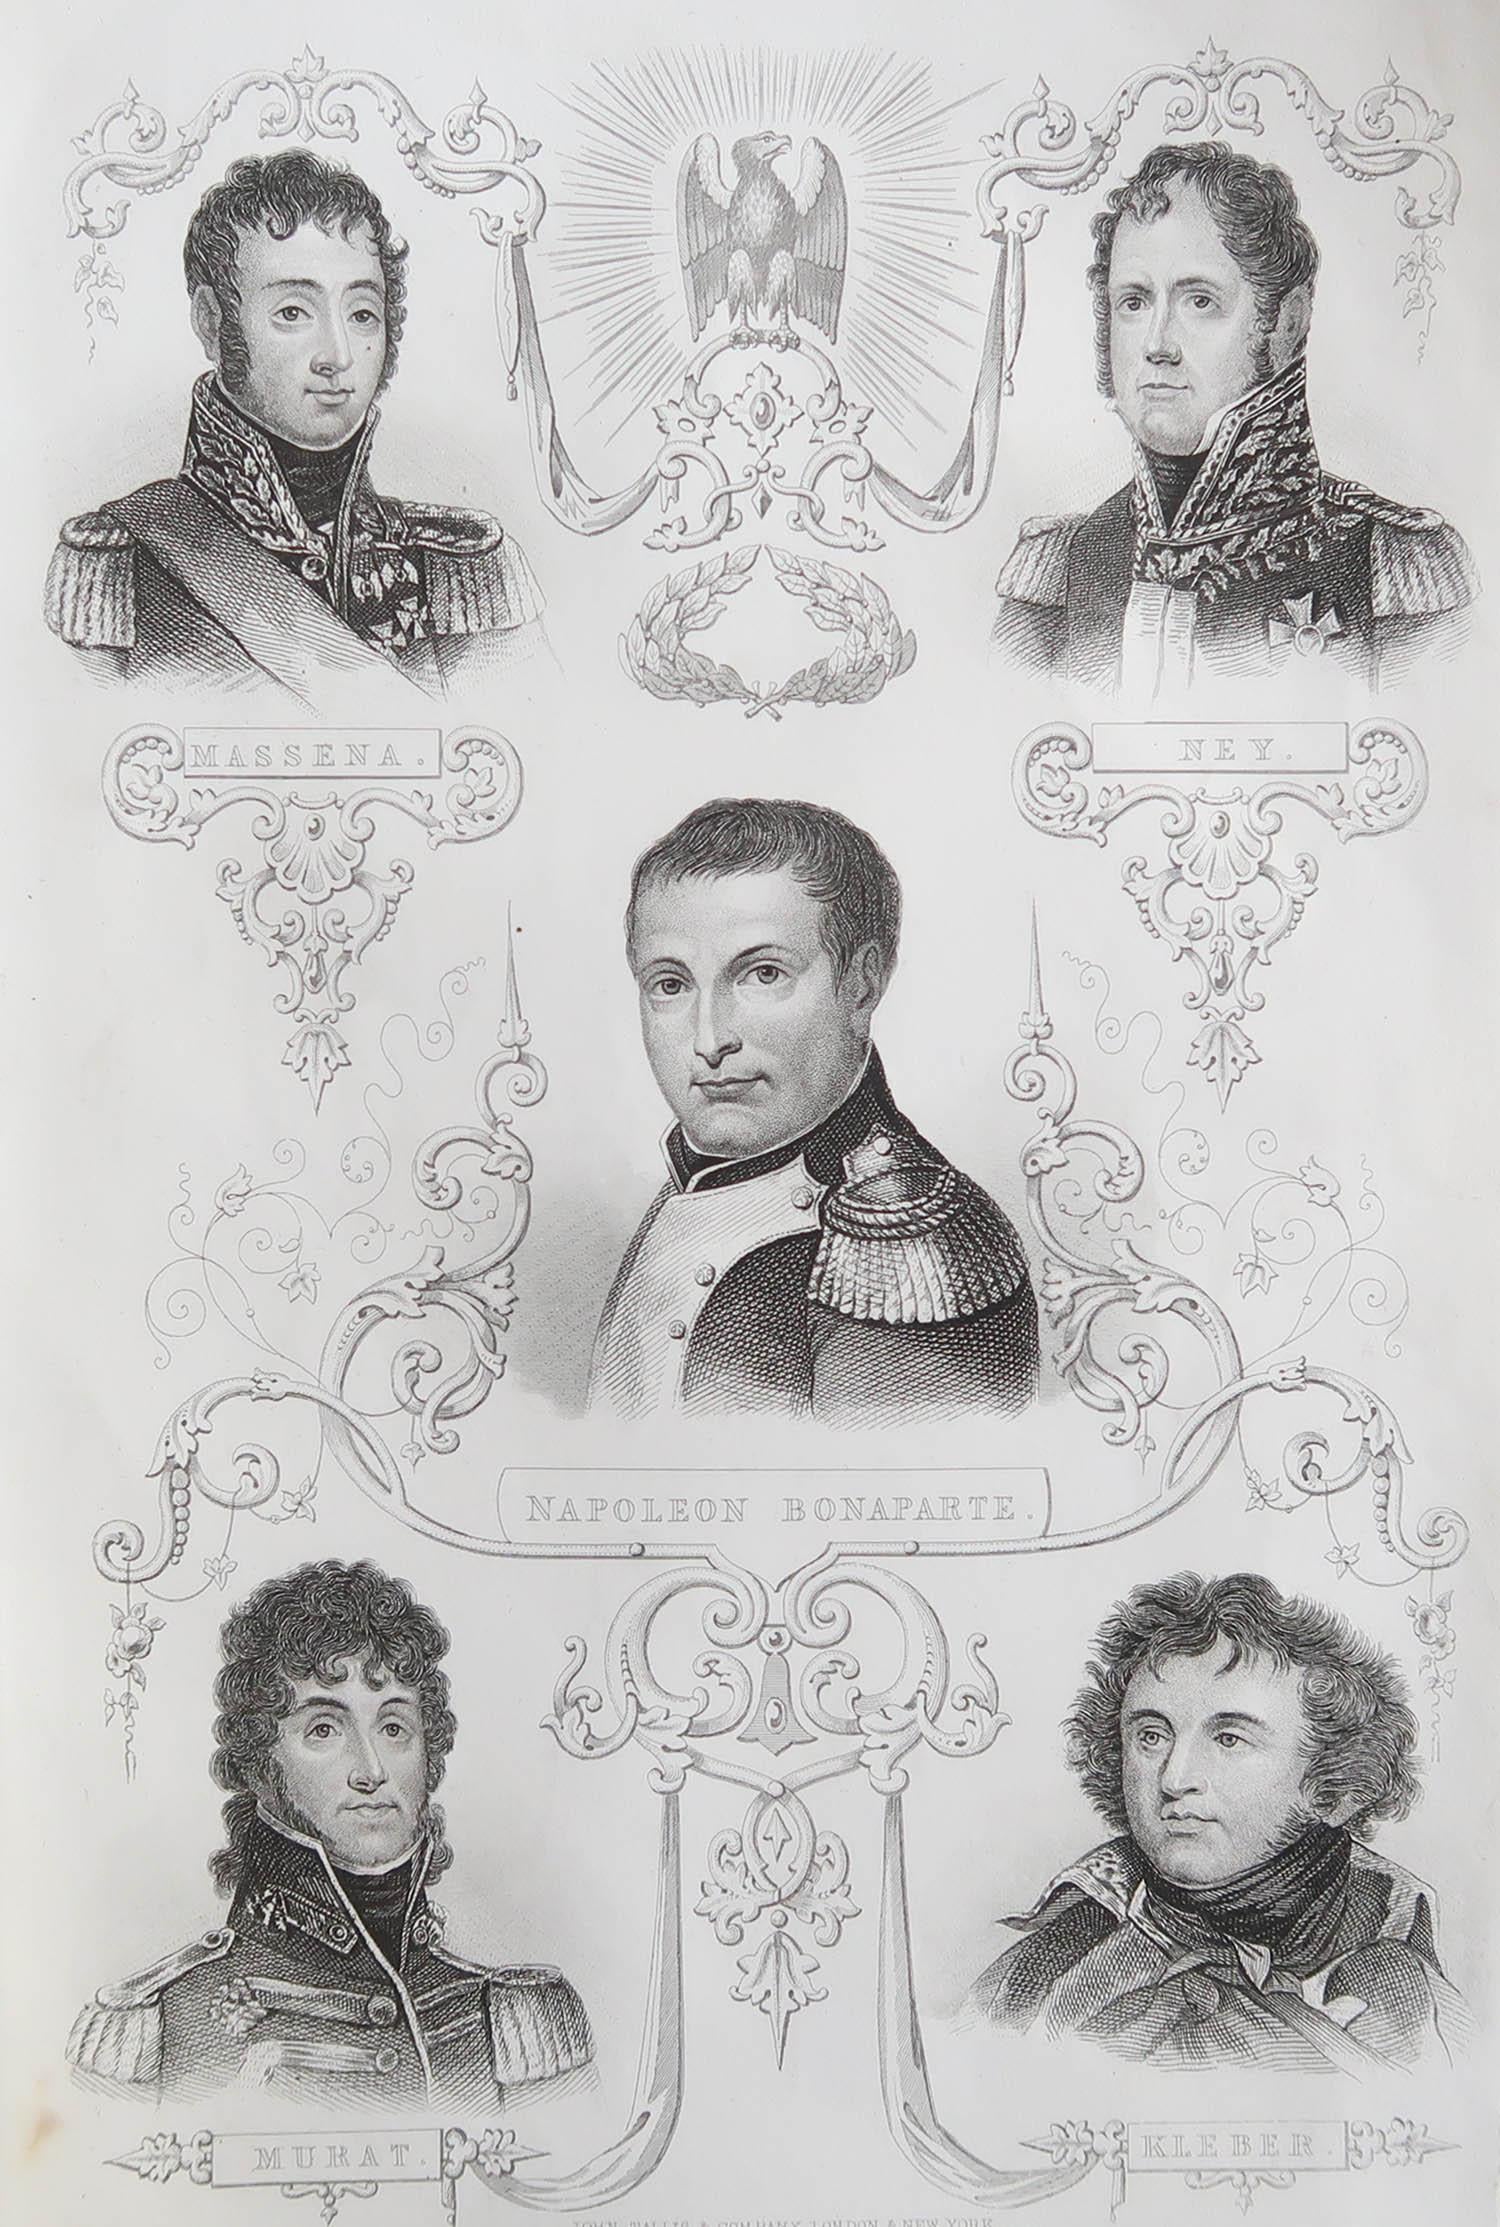 Great image of Napoleon Bonaparte and his generals

Fine steel engraving 

Published by Tallis circa 1850

Unframed.